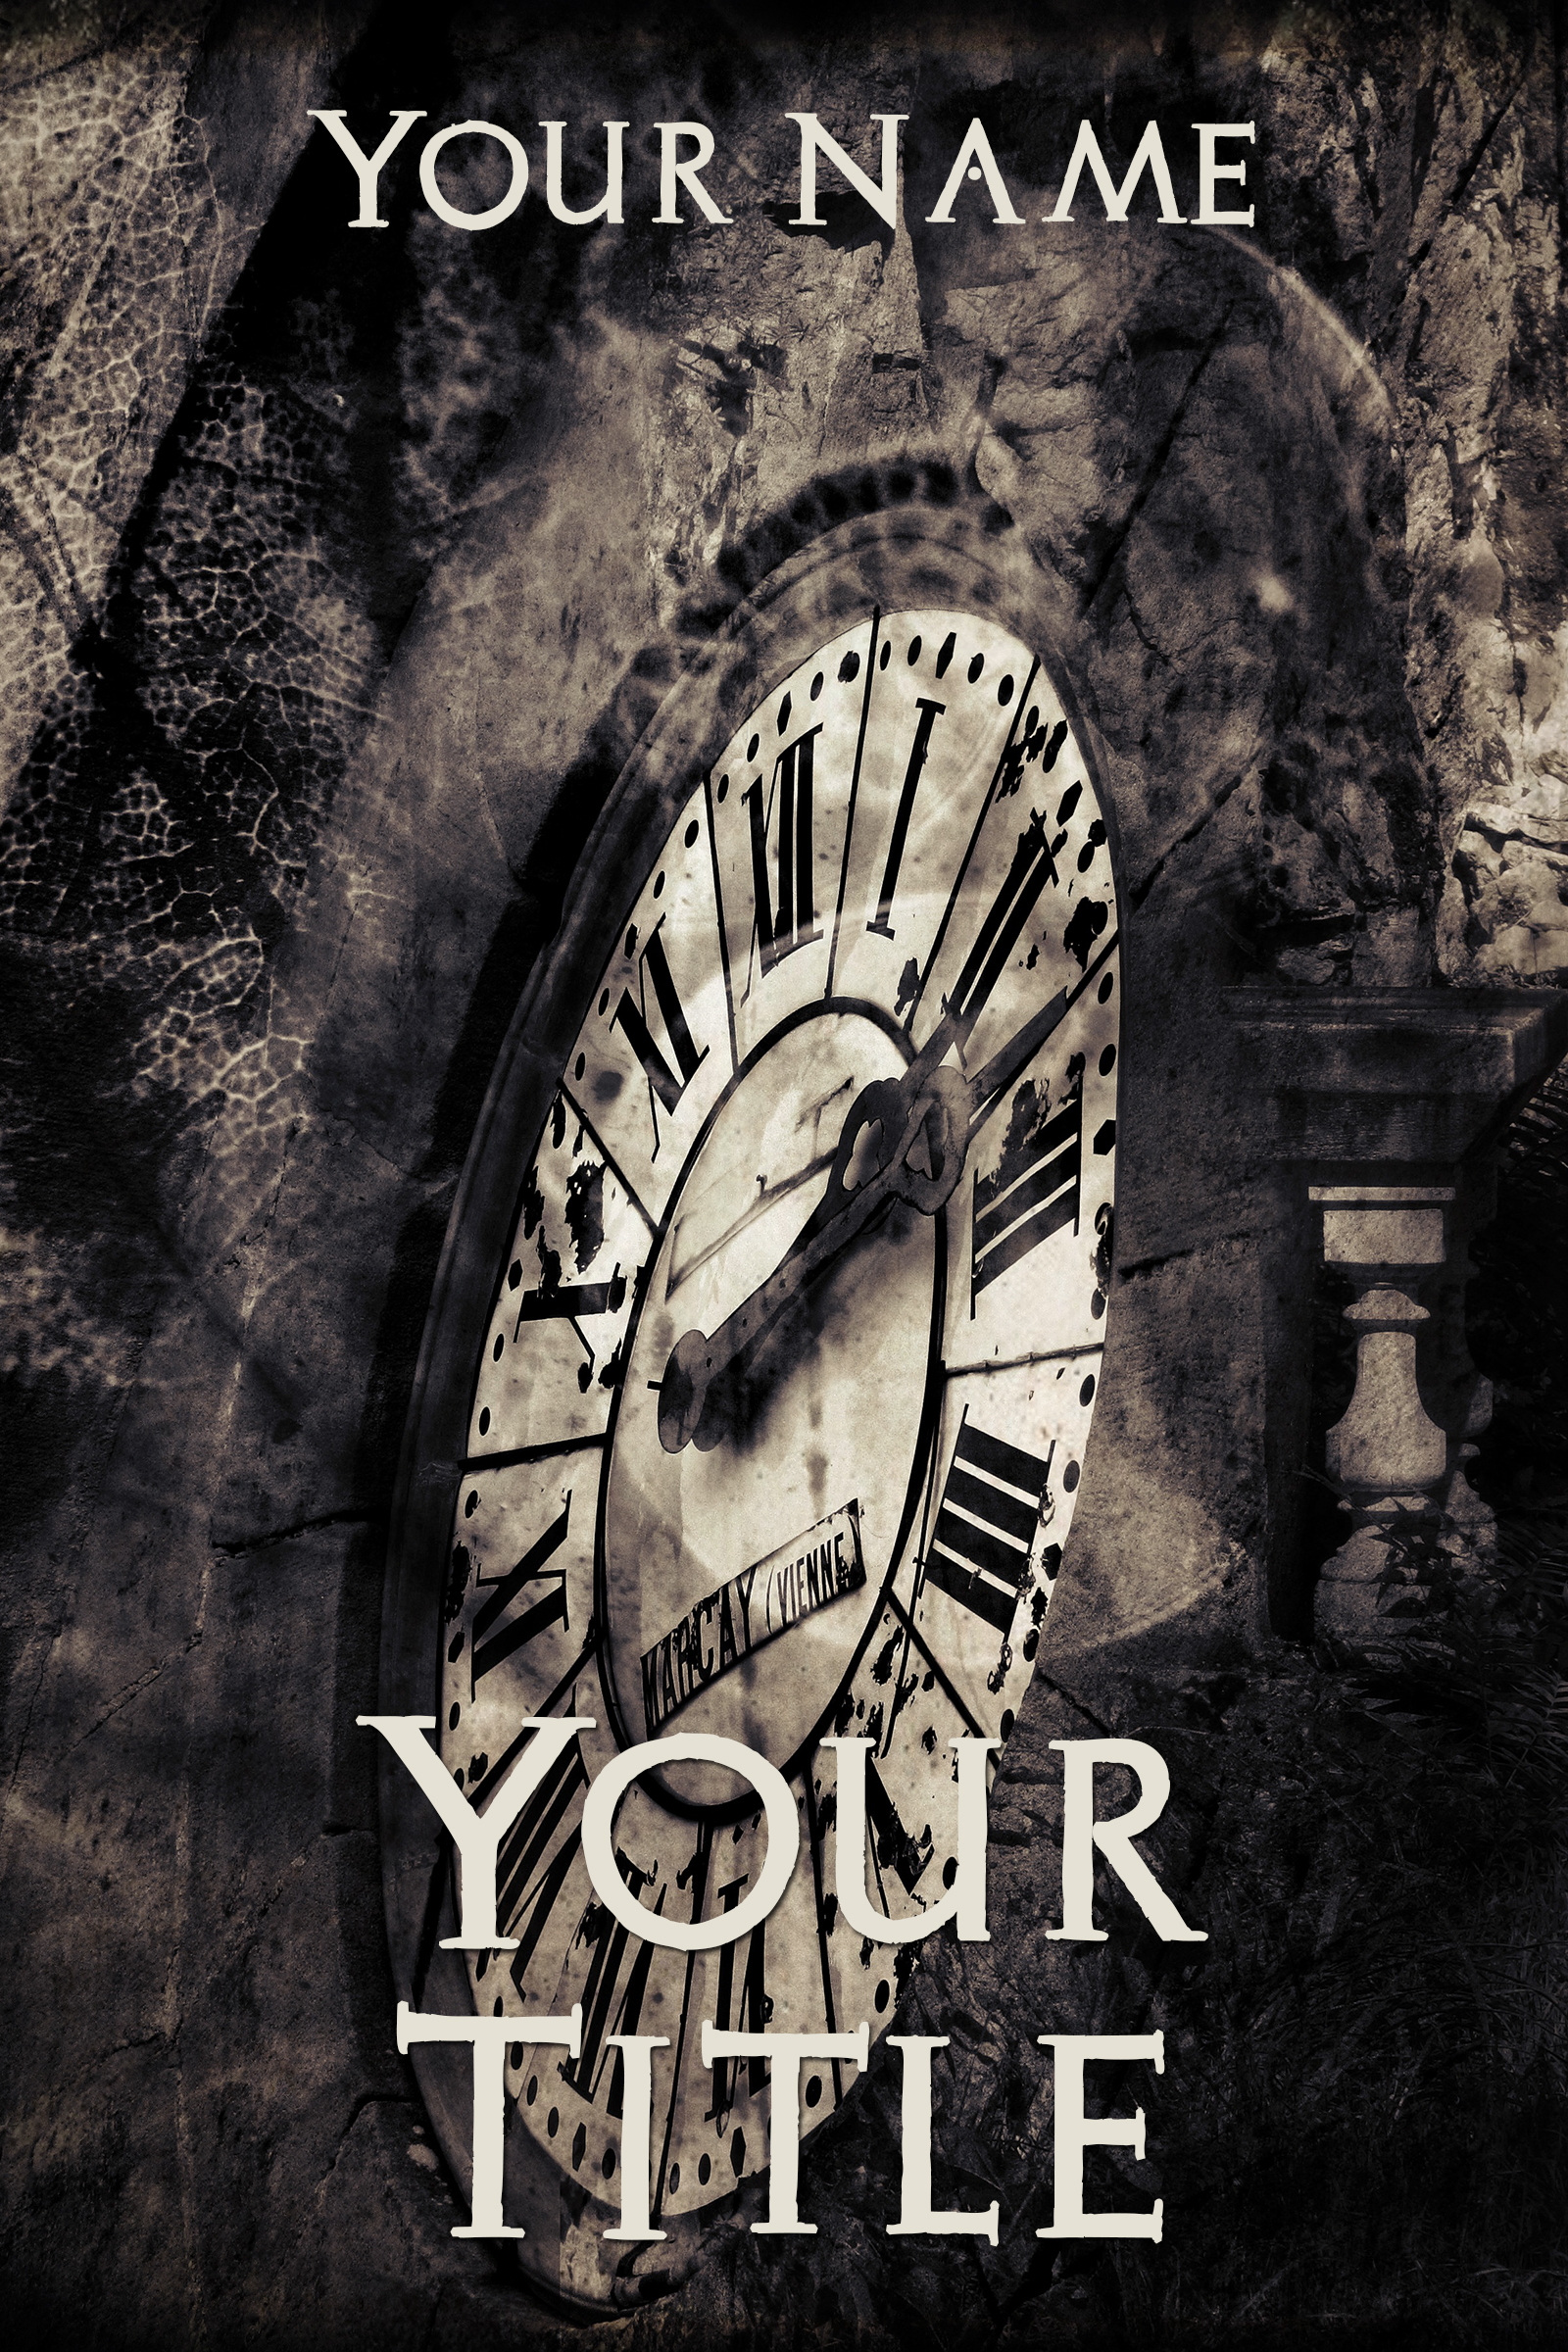 Old clock kindle cover just waiting to be personalized for you!